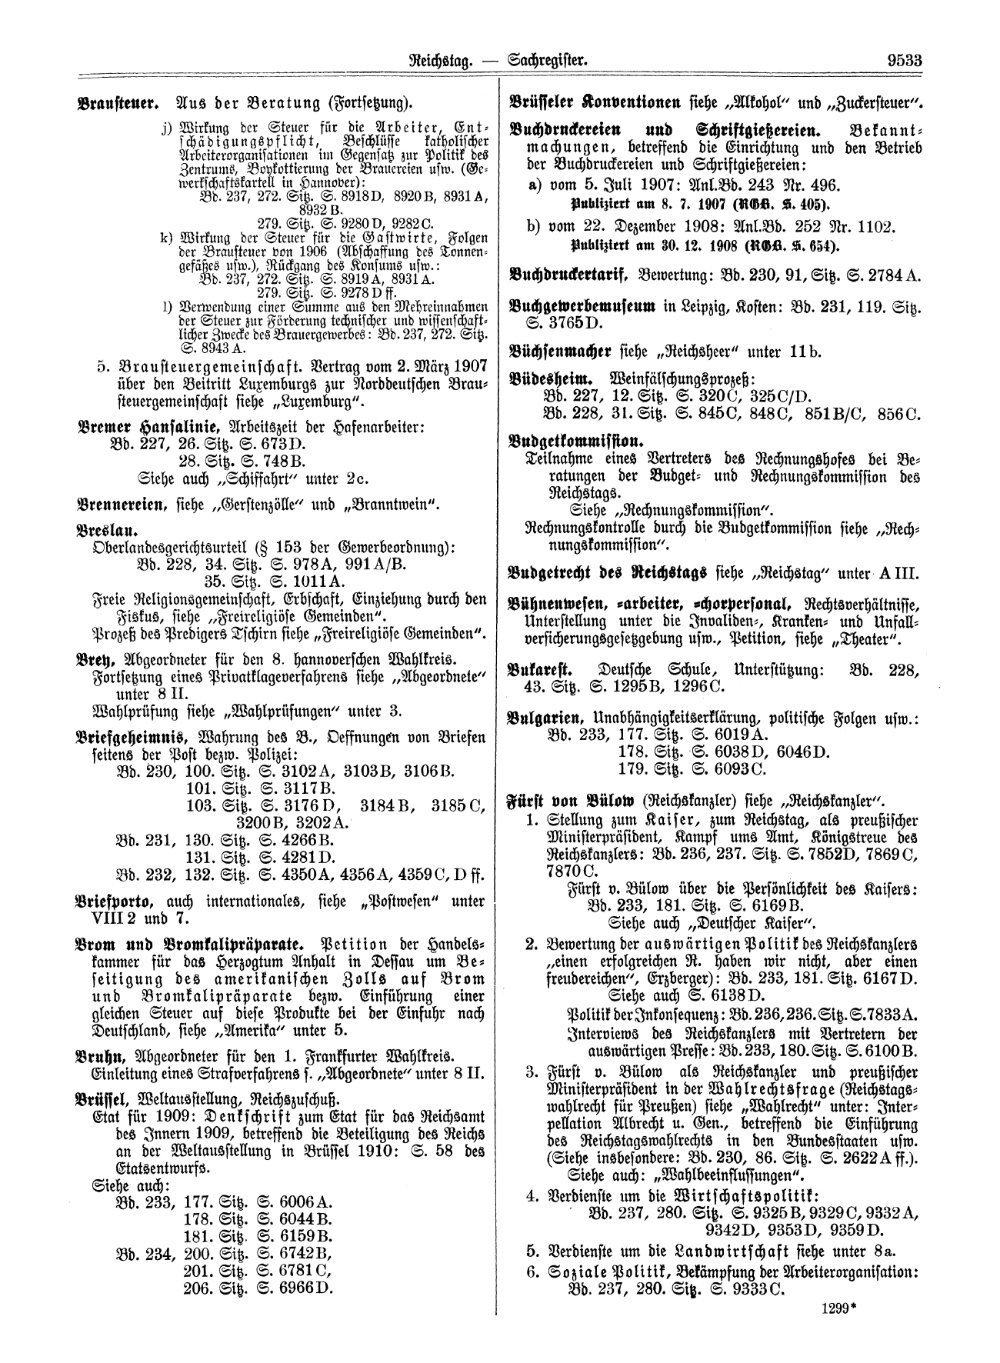 Scan of page 9533